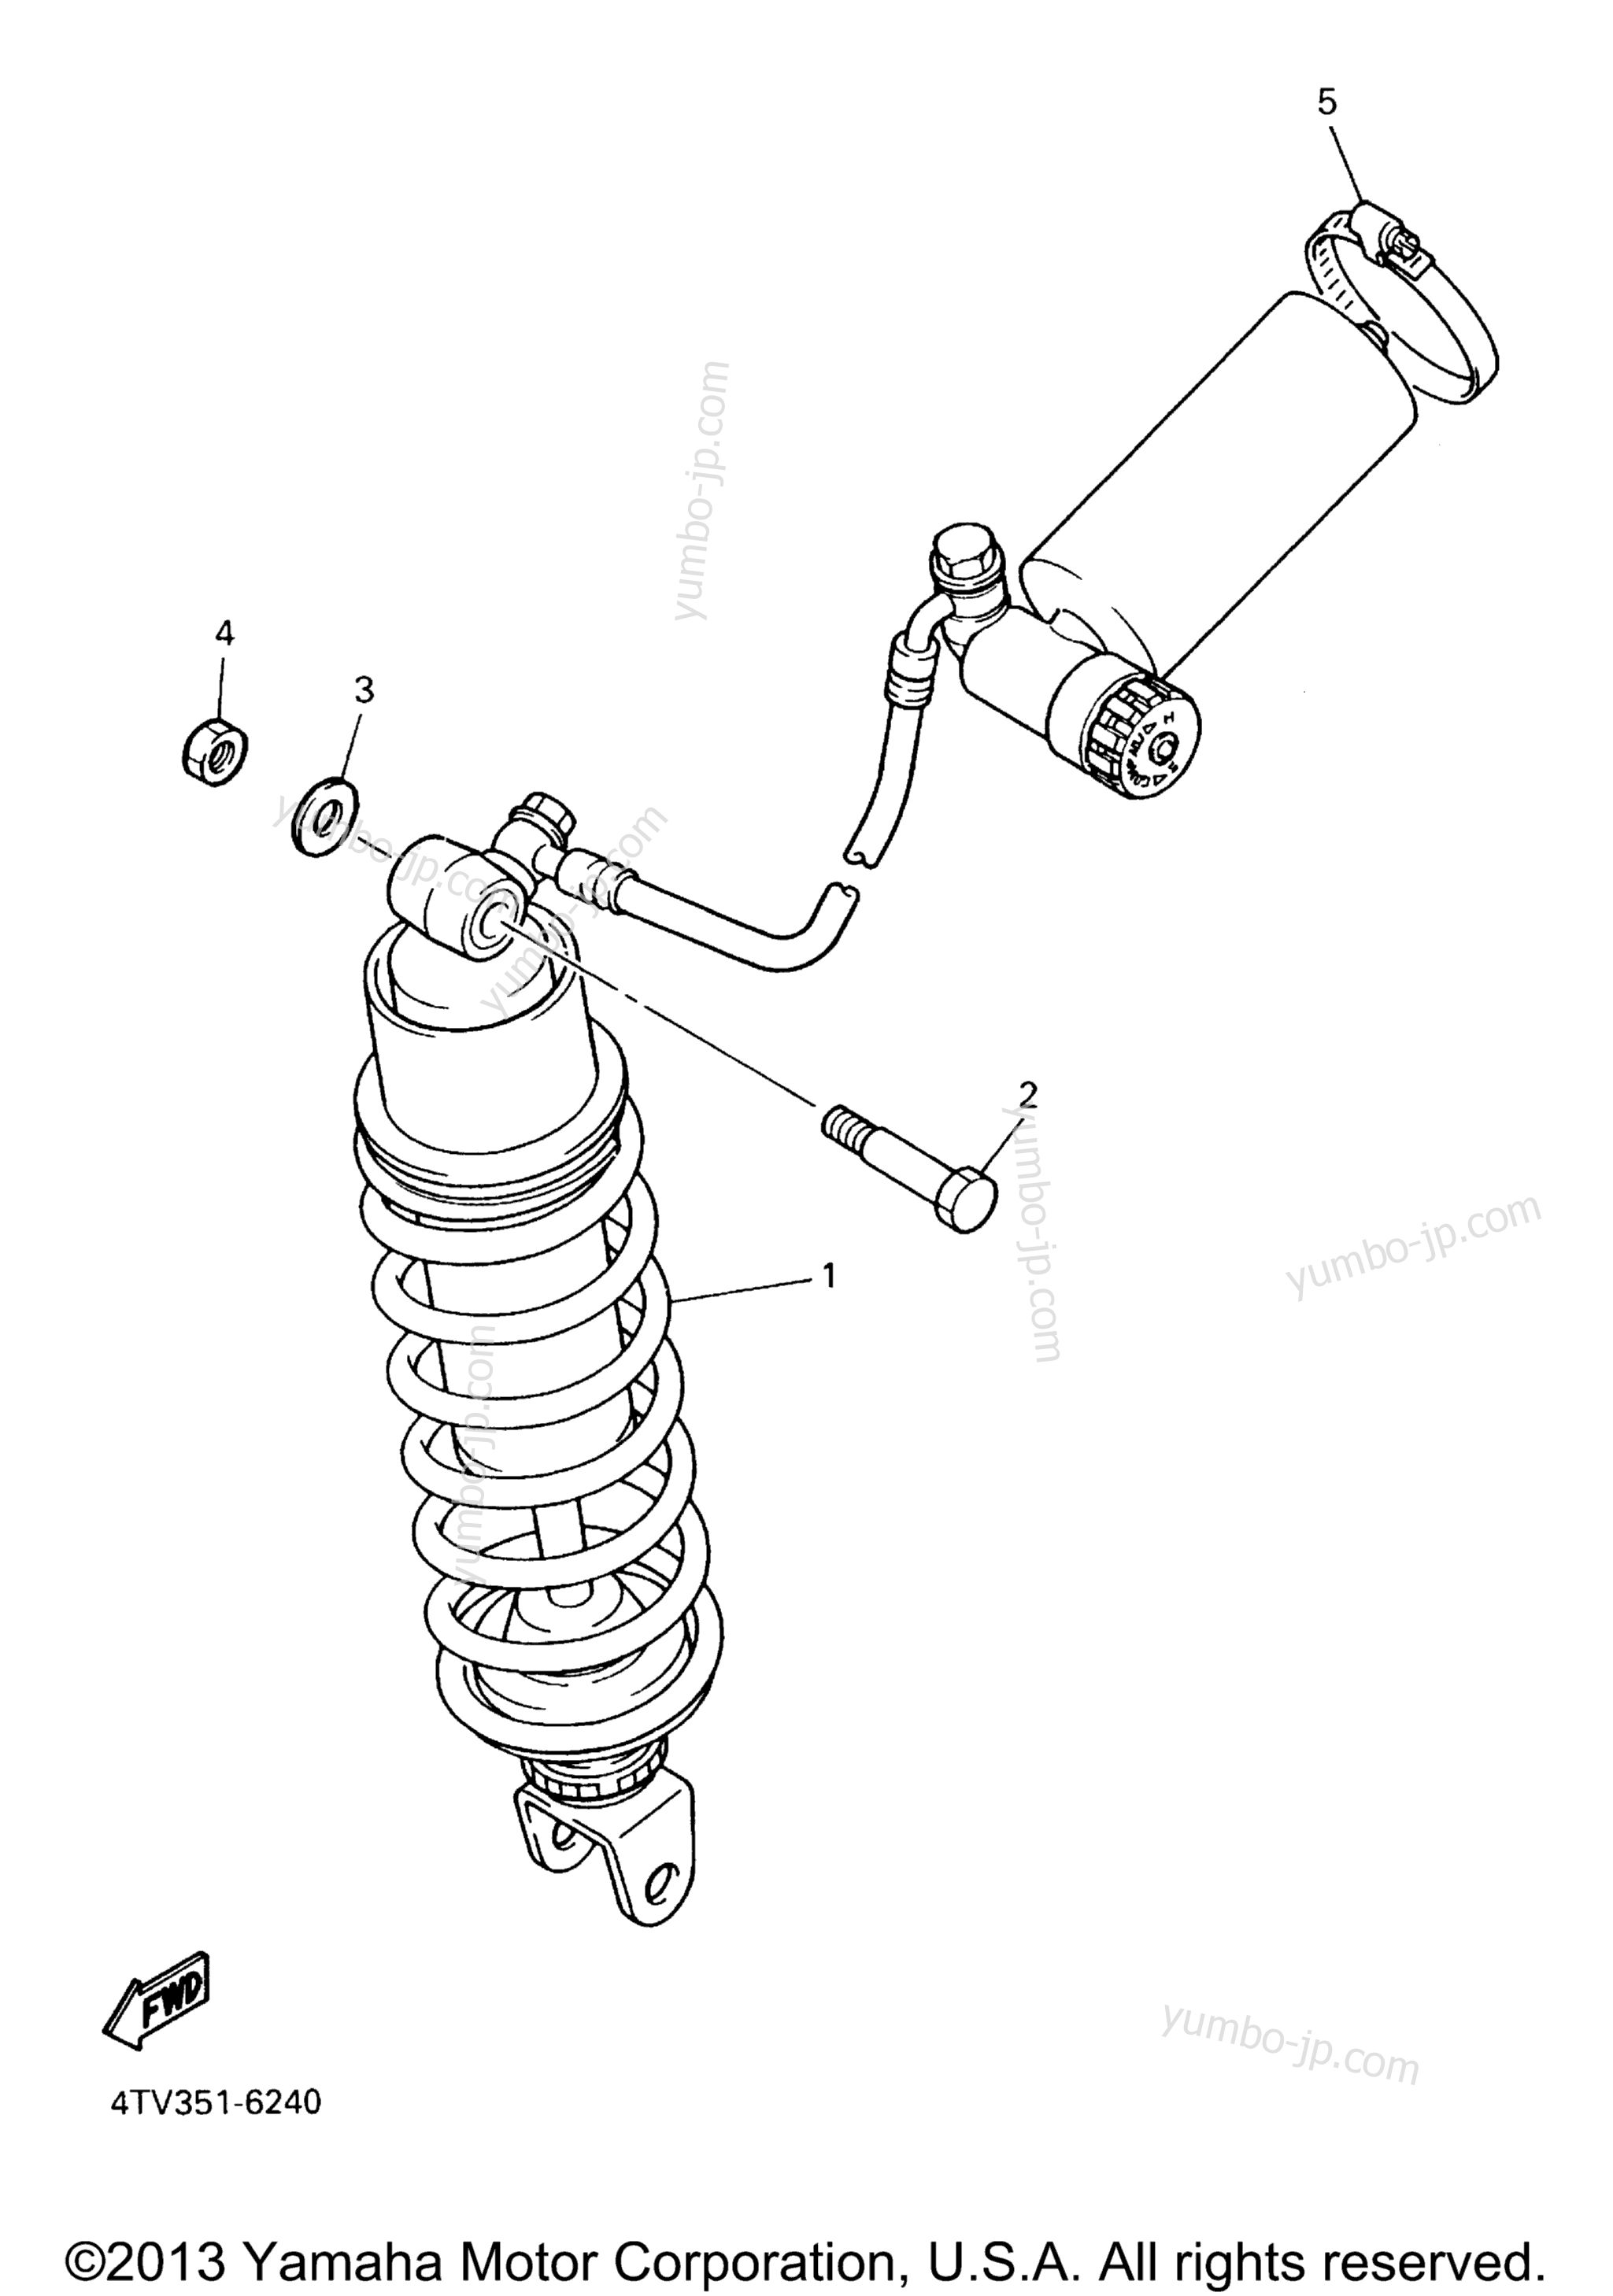 Rear Suspension for motorcycles YAMAHA YZF600R (YZF600RS) 2004 year